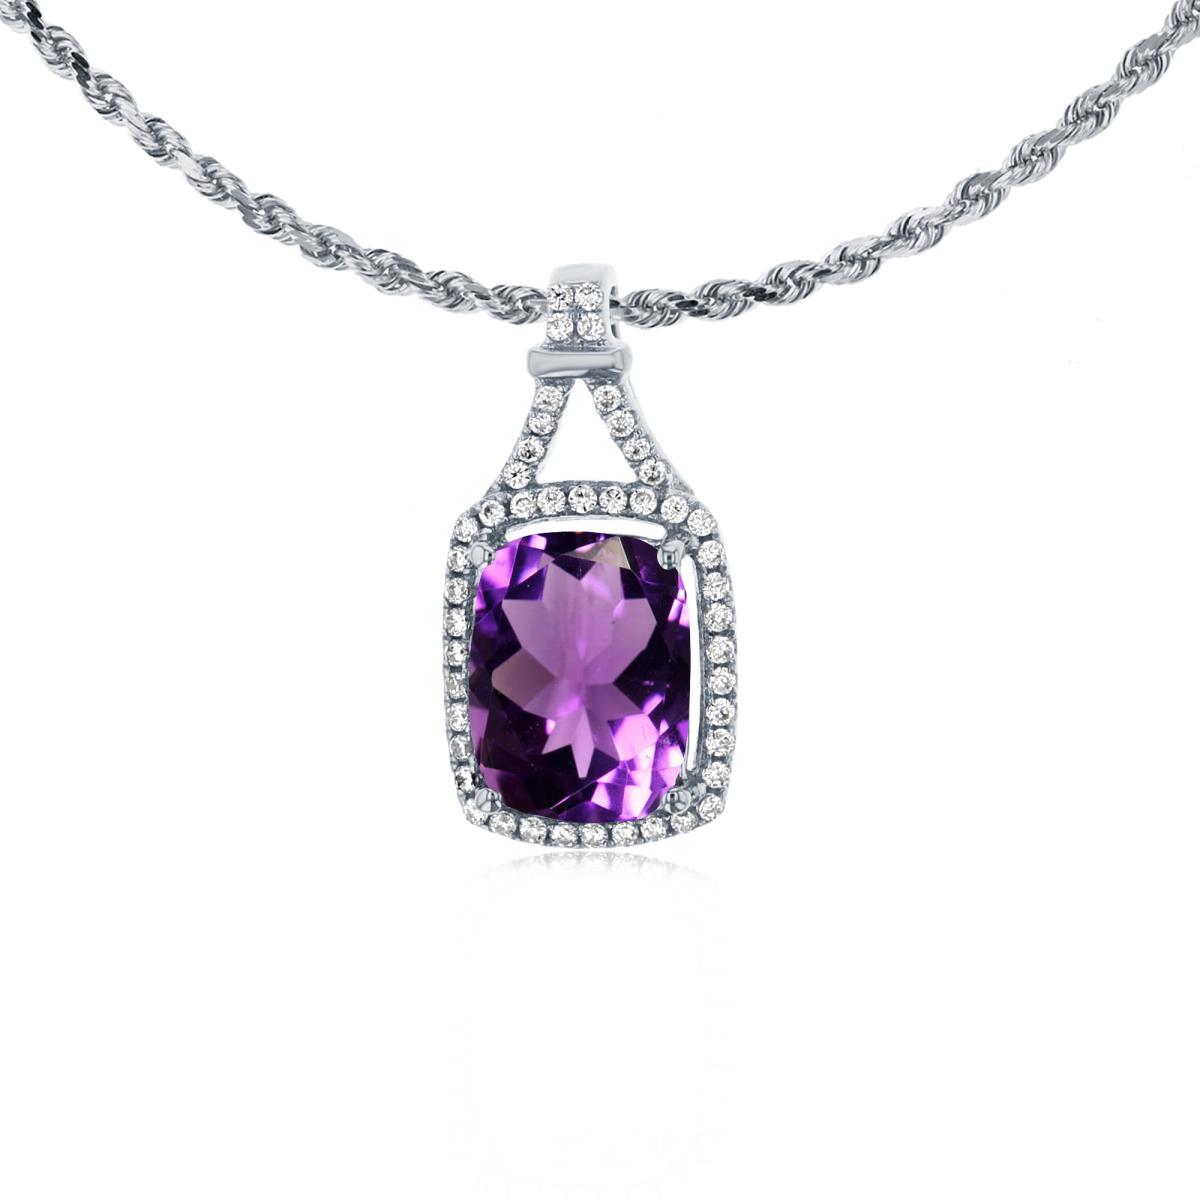 10K White Gold 8x6mm Cushion Amethyst & 0.13 CTTW Rd Diamonds Halo 18" Rope Chain Necklace